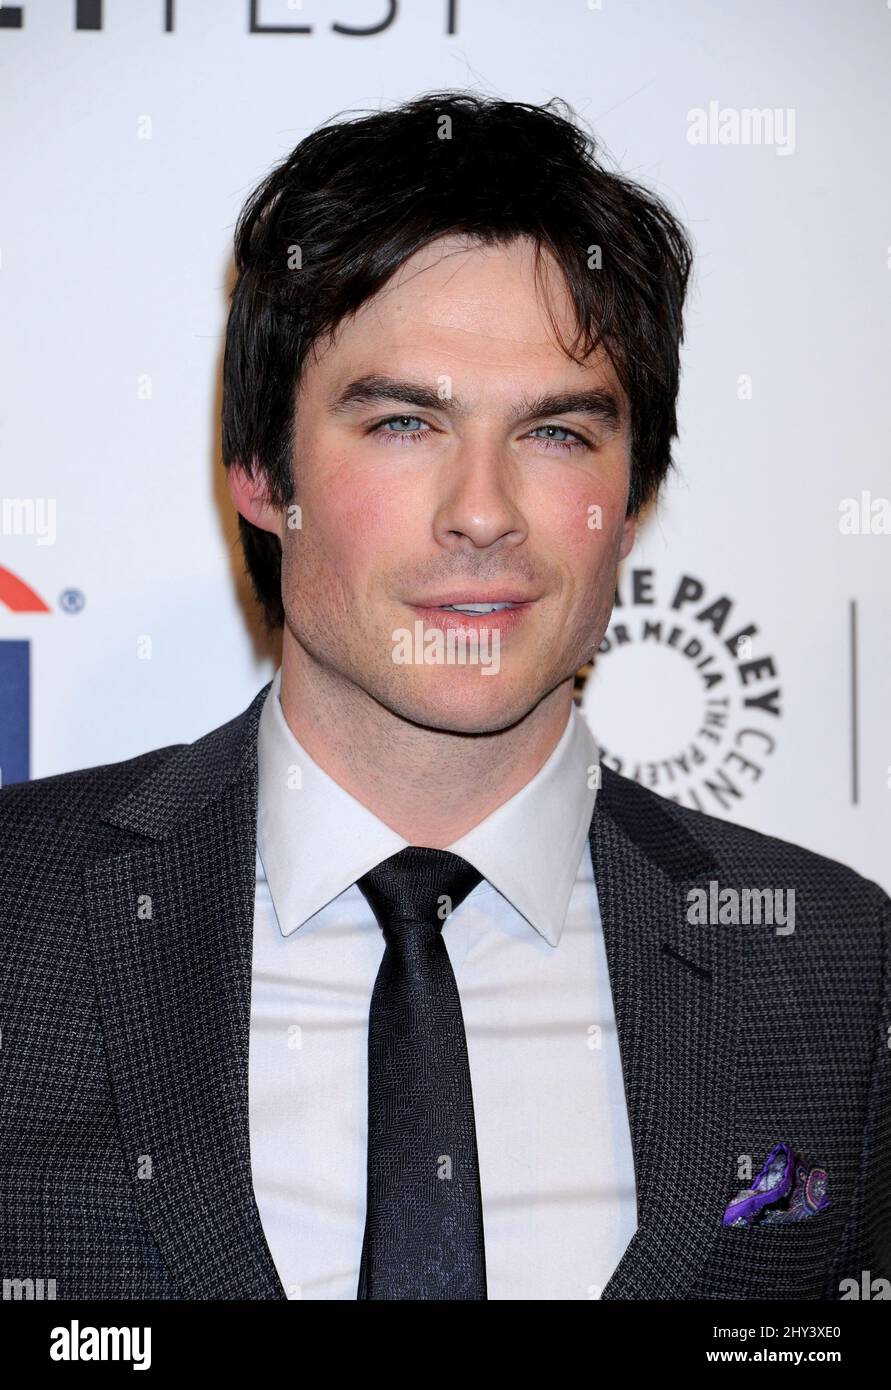 Ian Somerhalder attending a photocall for 'The Vampire Diaries' at Paley Centre in Los Angeles, California. Stock Photo